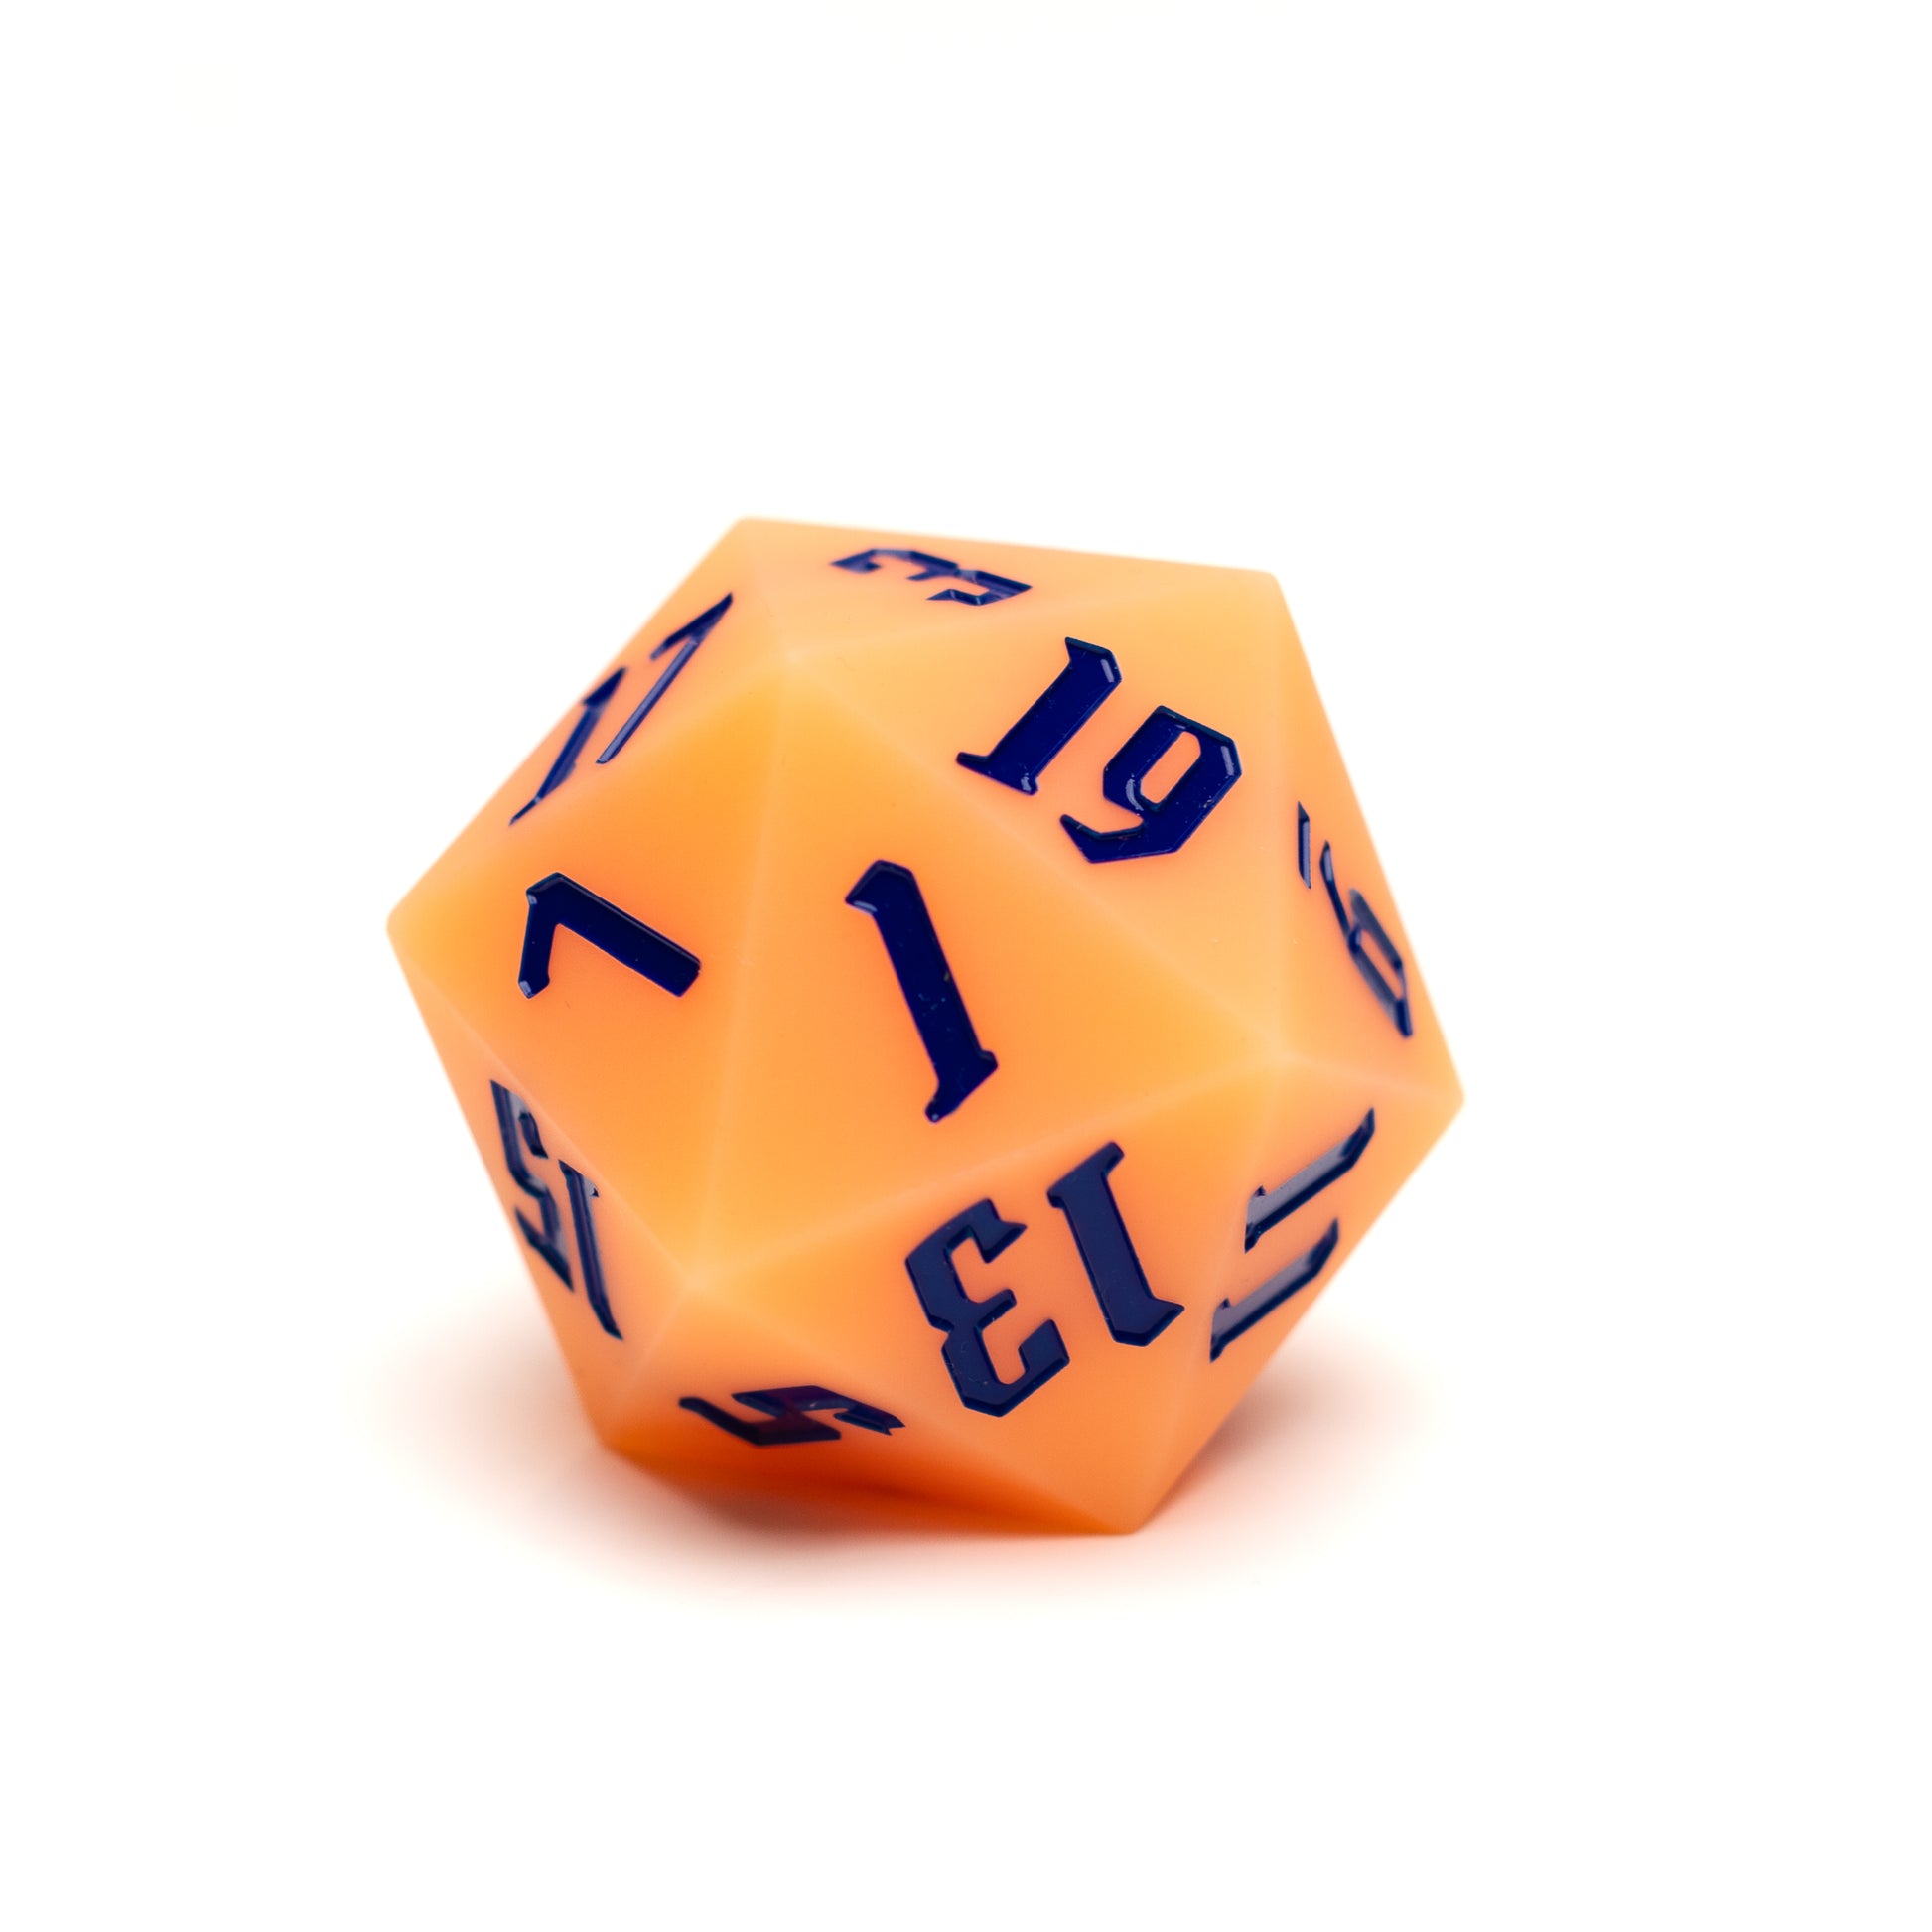 Roll Britannia Orange Bouncy Silicon 55mm D20 Glow in the Dark Dungeons and Dragons Dice